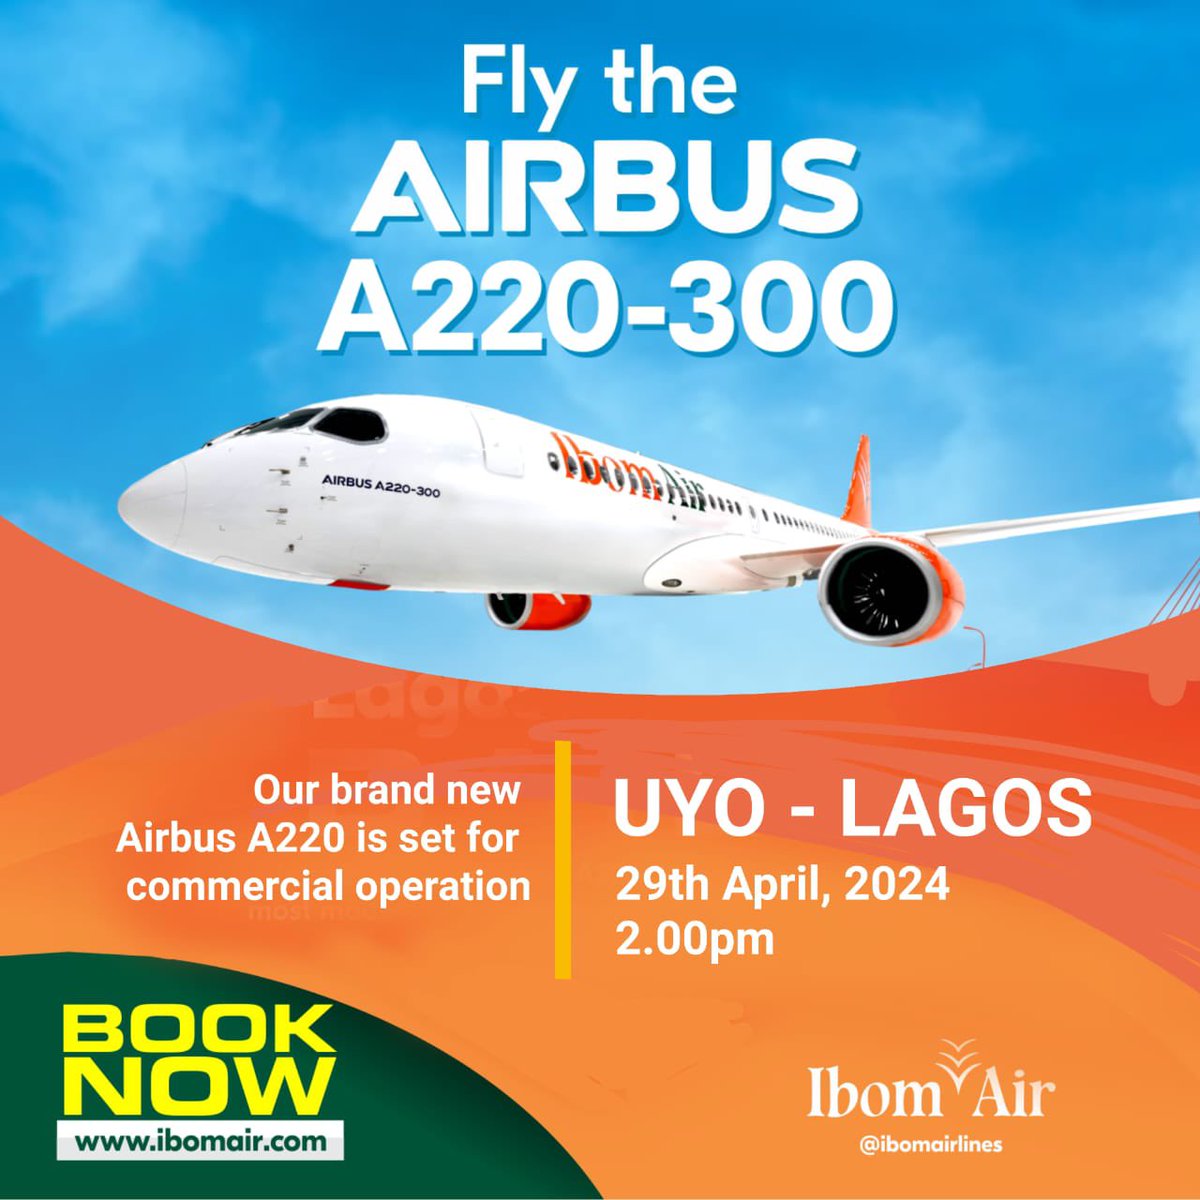 History will be made tomorrow. The inaugural flight on @ibomairlines’ brand new Airbus A220-300 will fly from Uyo to Lagos Tomorrow. Be a part of history. Book now!